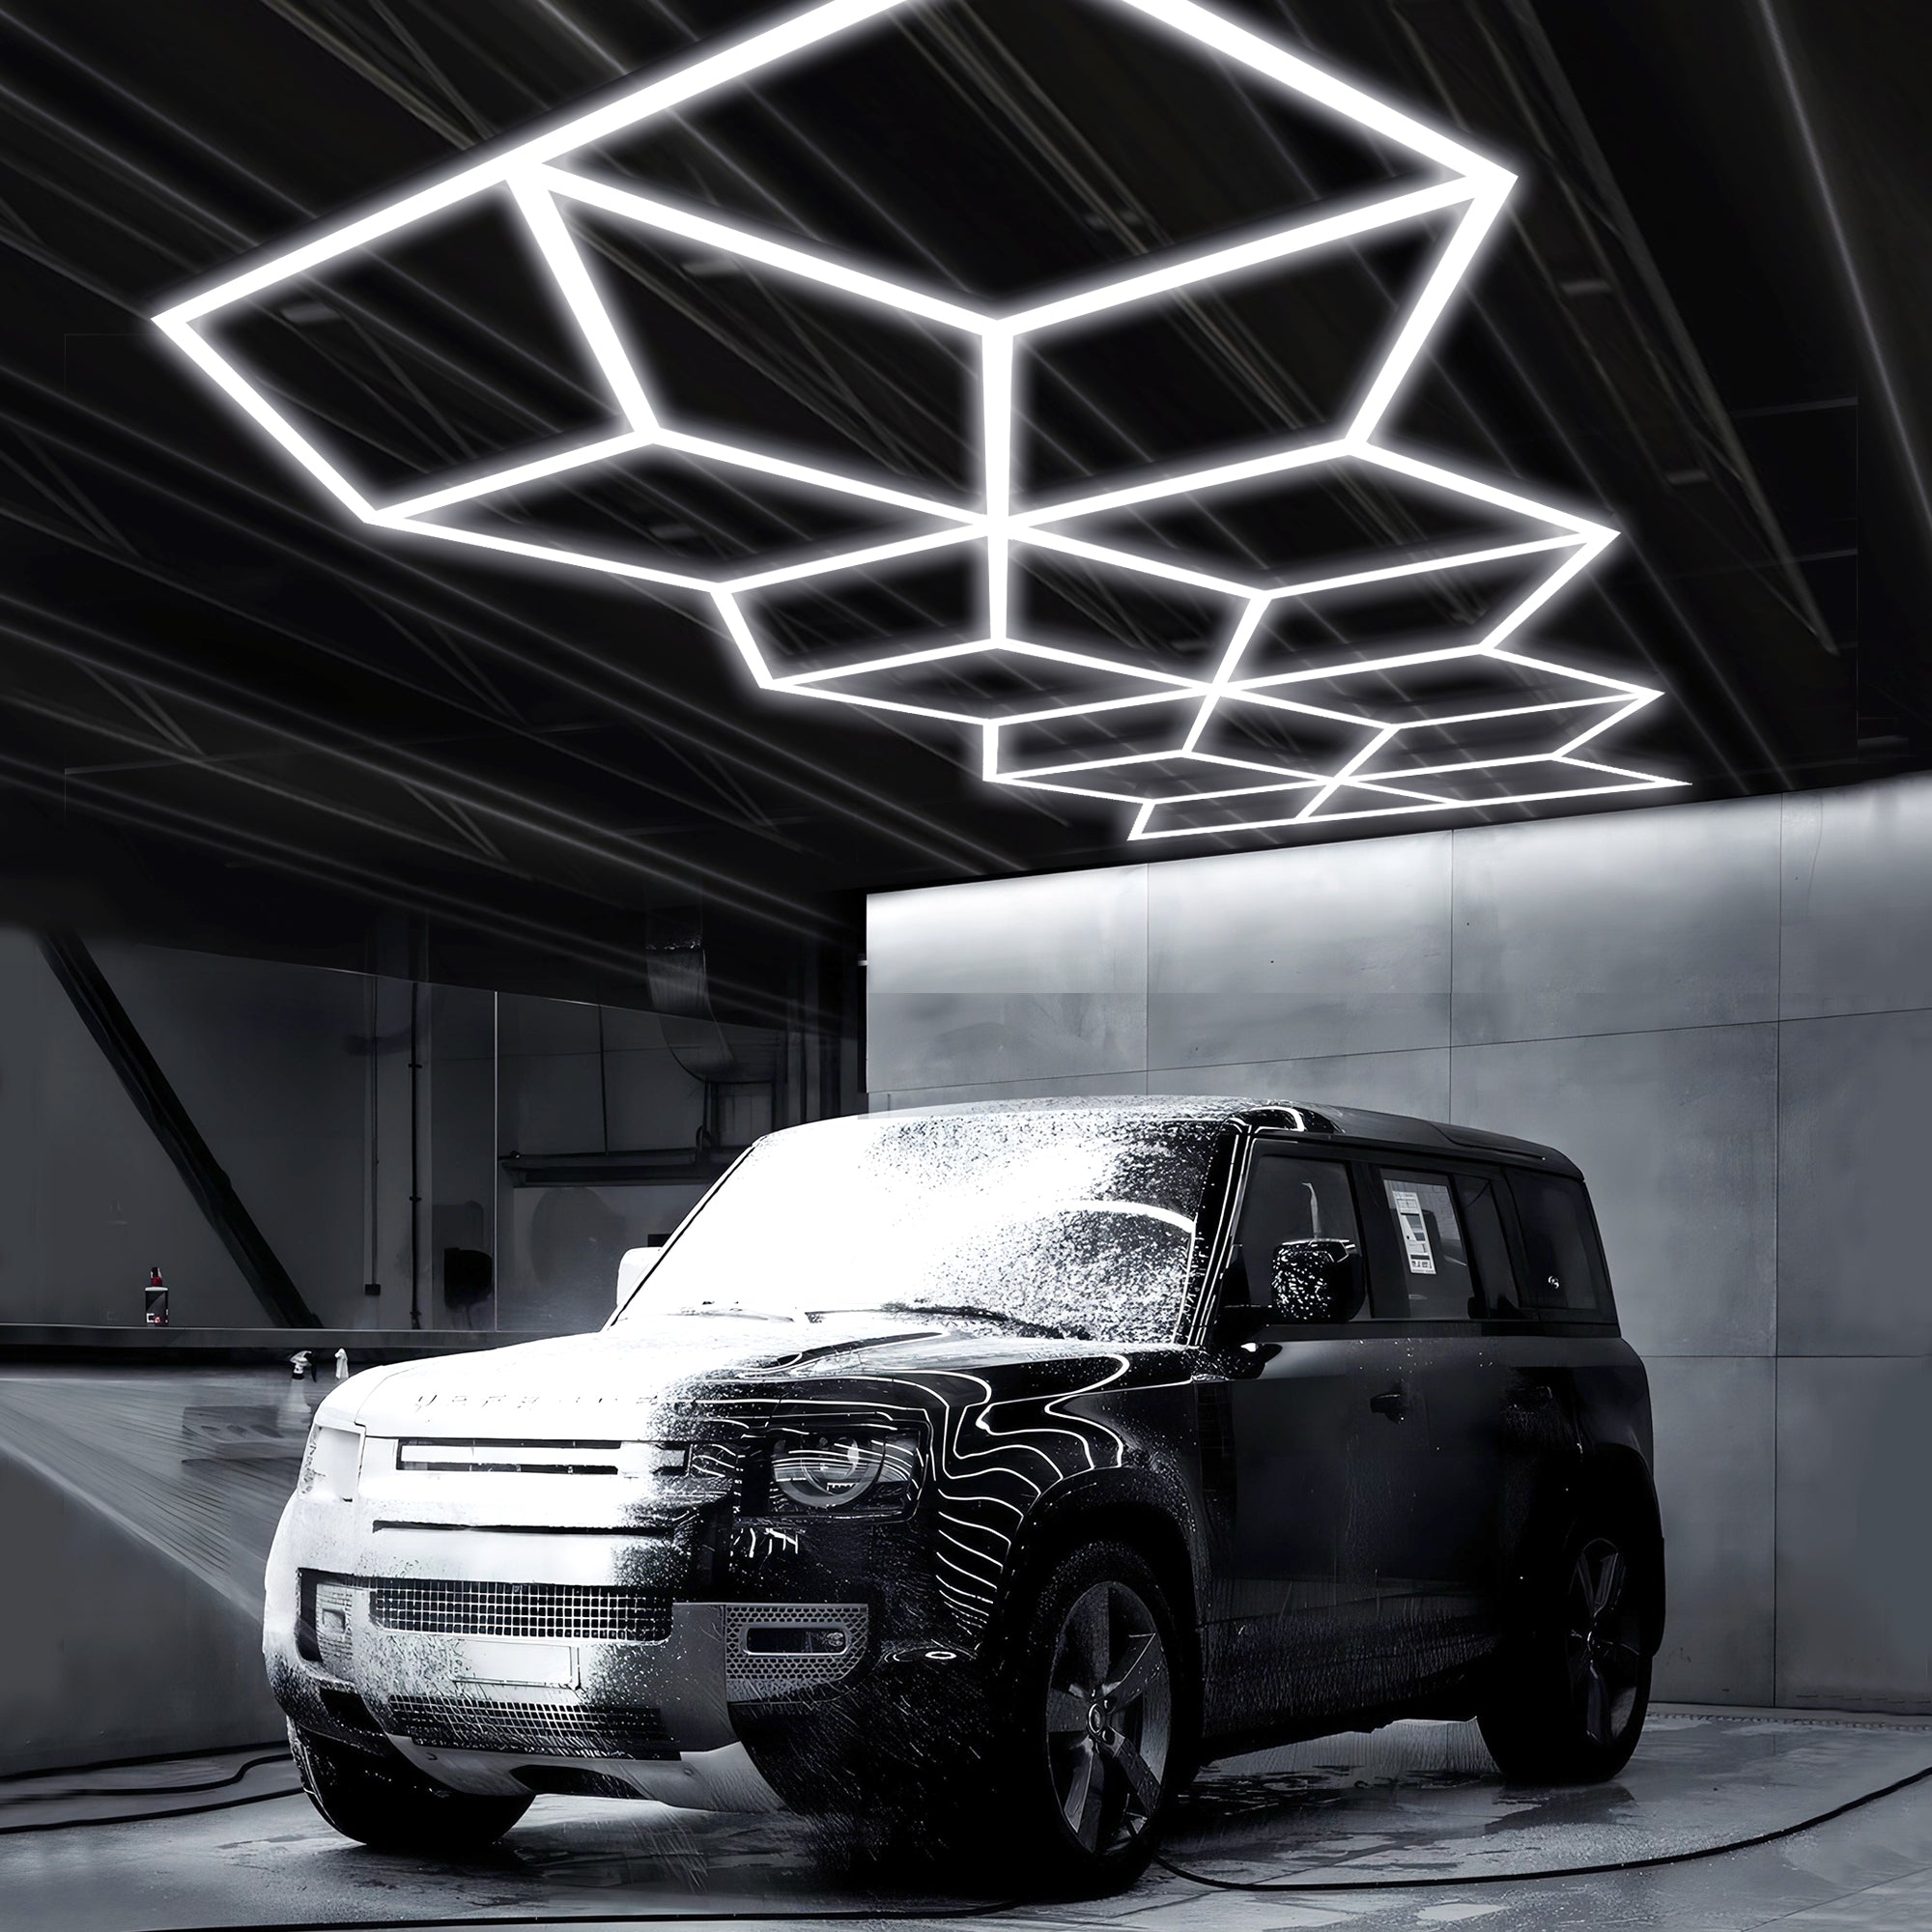 Serenity HexaLED Ambient Glow Light ST6109 enhancing a garage area, providing a serene backdrop for an immersive experience.